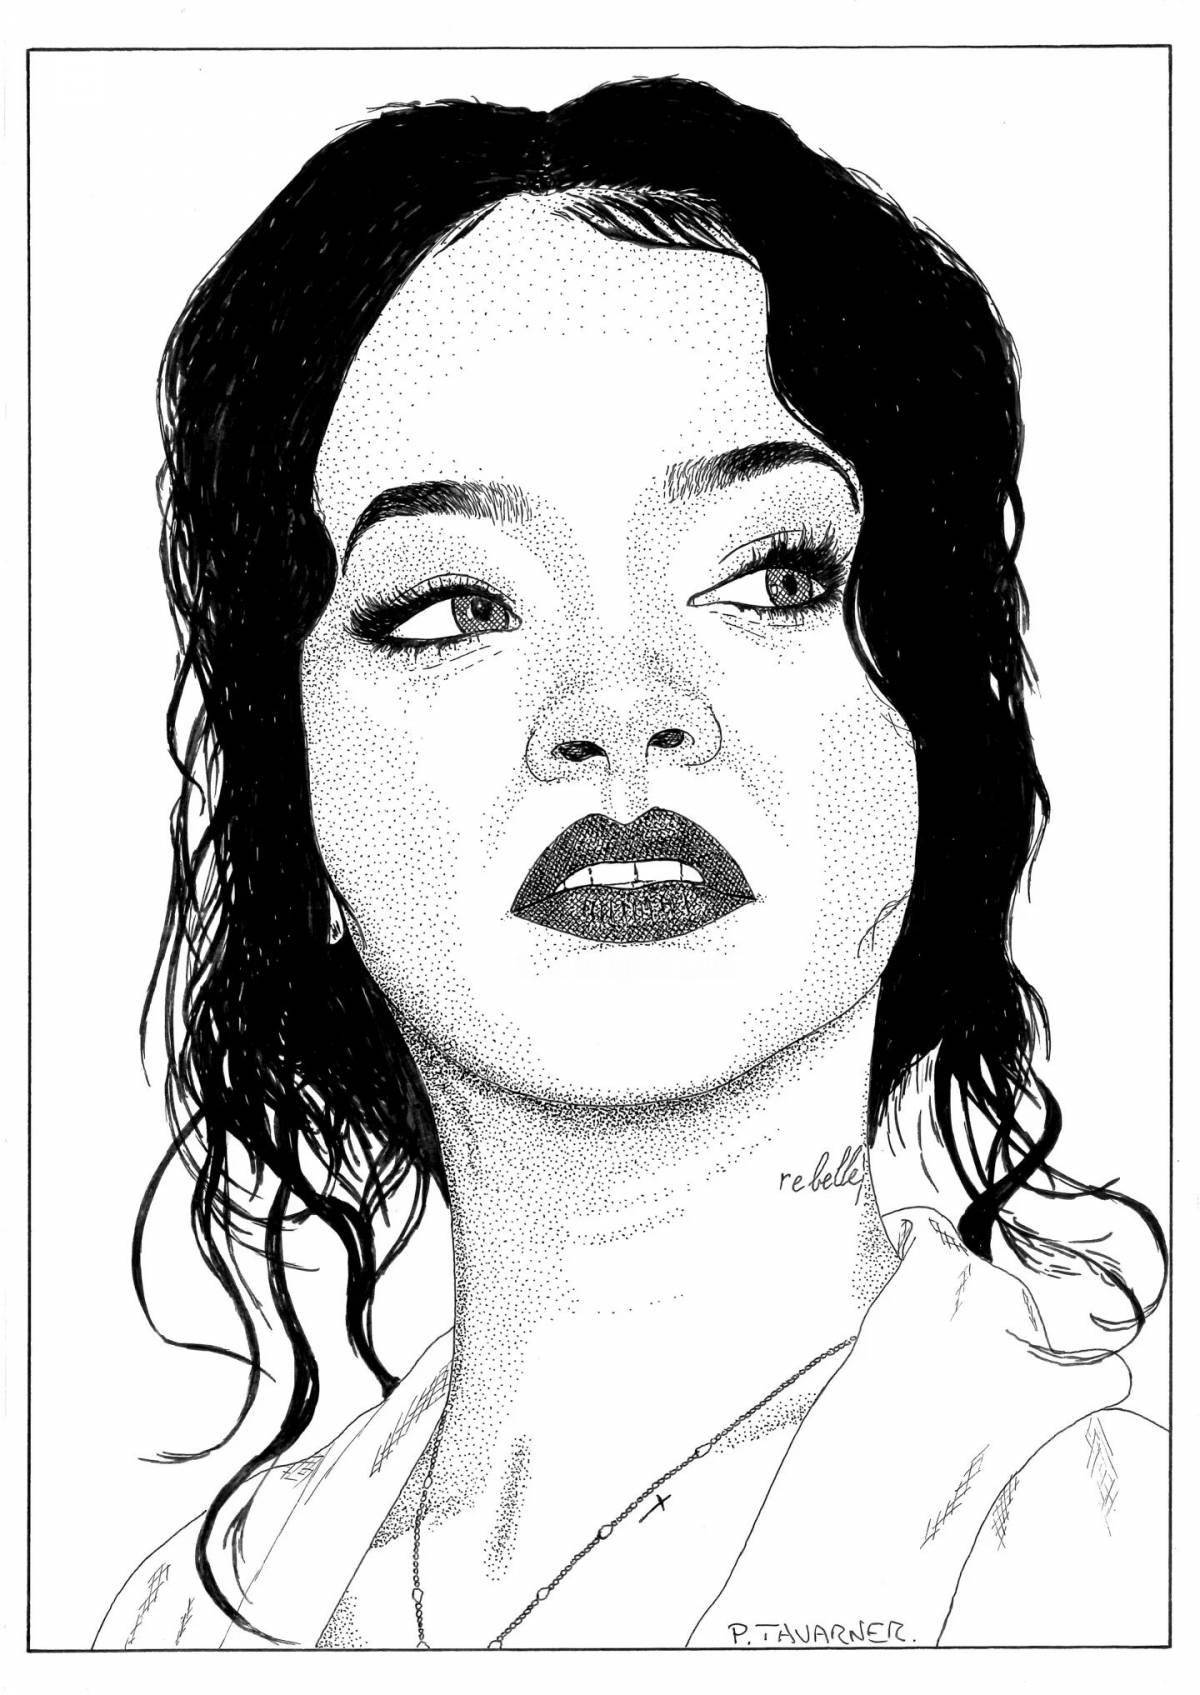 Rihanna's amazing coloring page